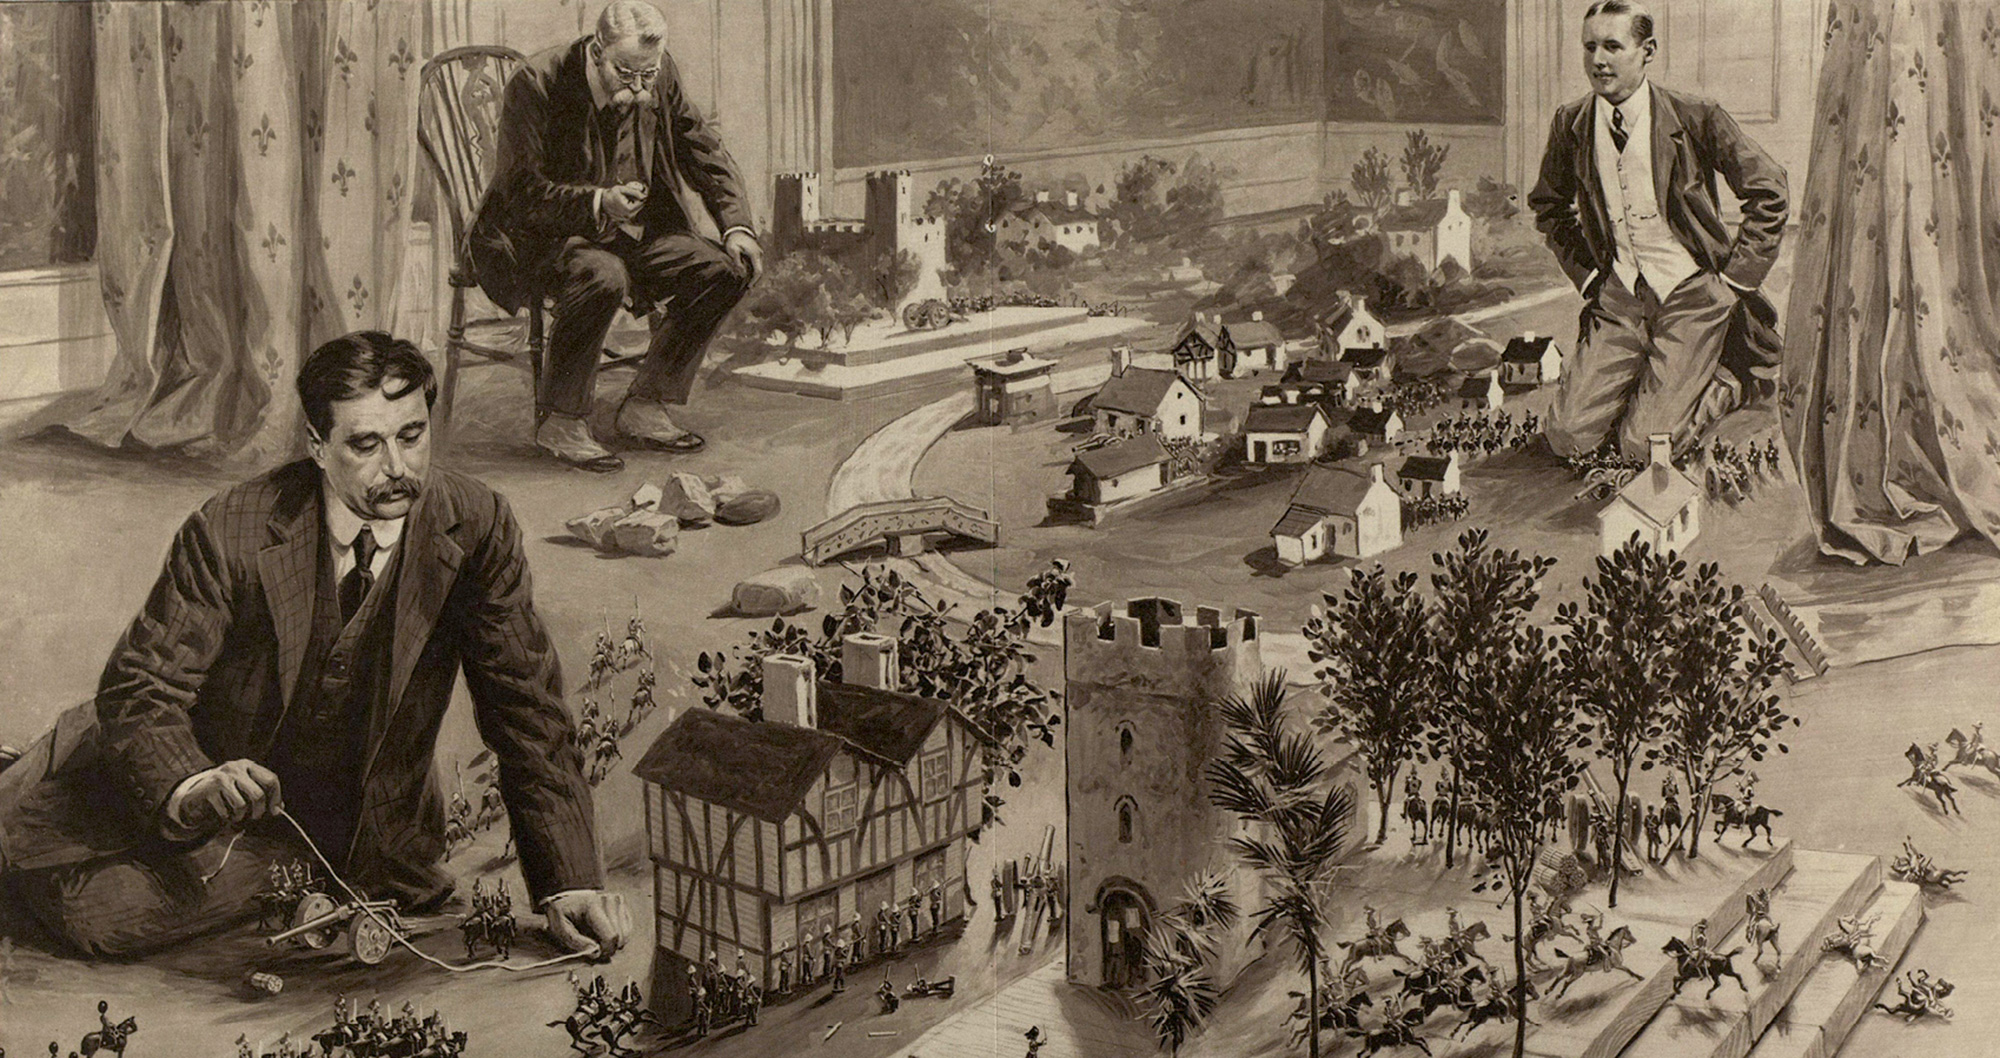 An illustration of H. G. Wells from the 25 January nineteen thirteen issue of the “Illustrated London News.” A caption at the bottom of the image reads: “War on the floor, with leaden soldiers, cardboard and shrub country, and guns firing wooden ‘shells’: Mr. H. G. Wells playing little wars.”